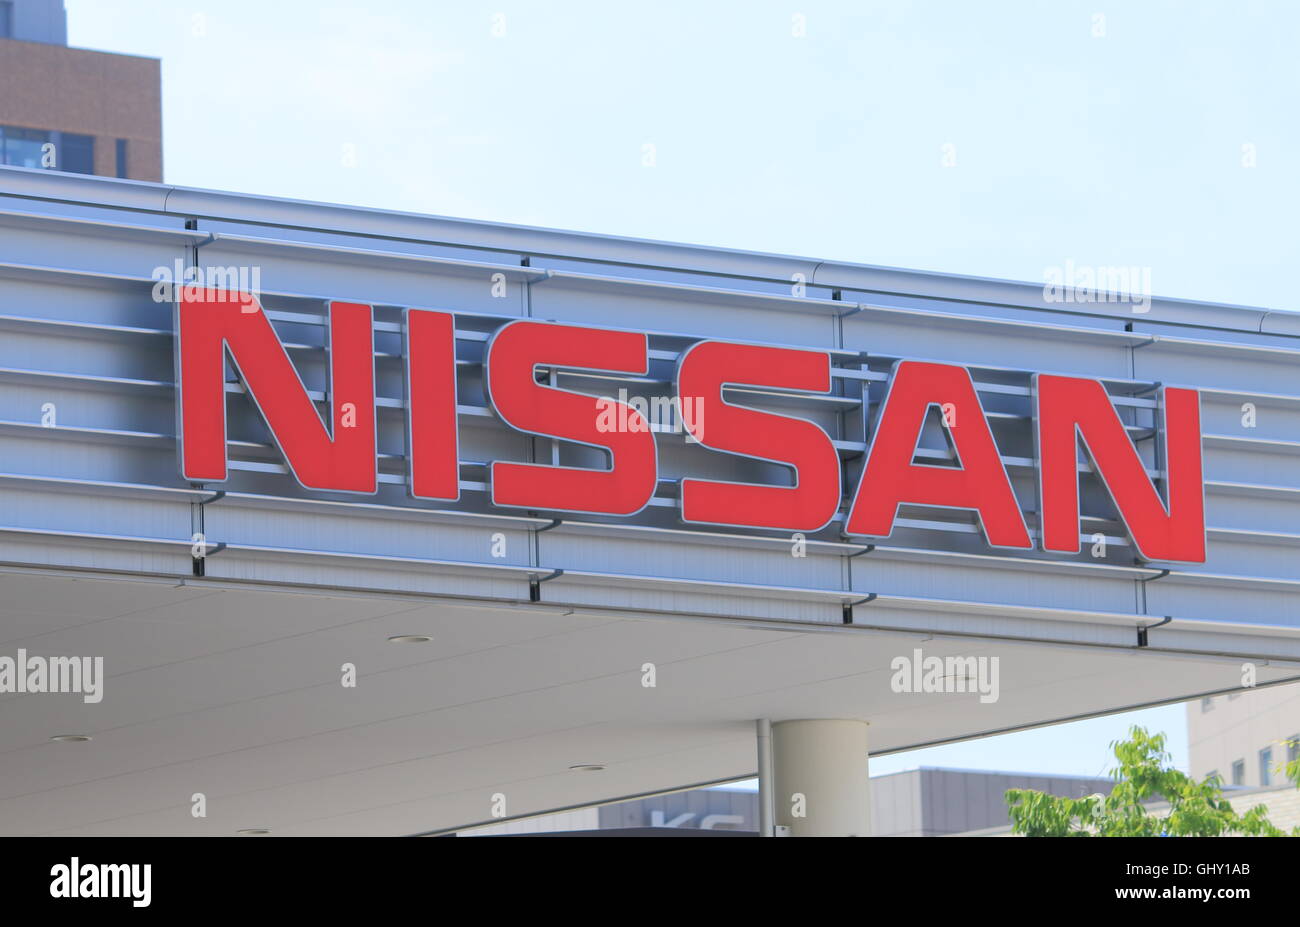 NISSAN company logo, Japanese car manufacturer and one of the biggest in Japan. Stock Photo